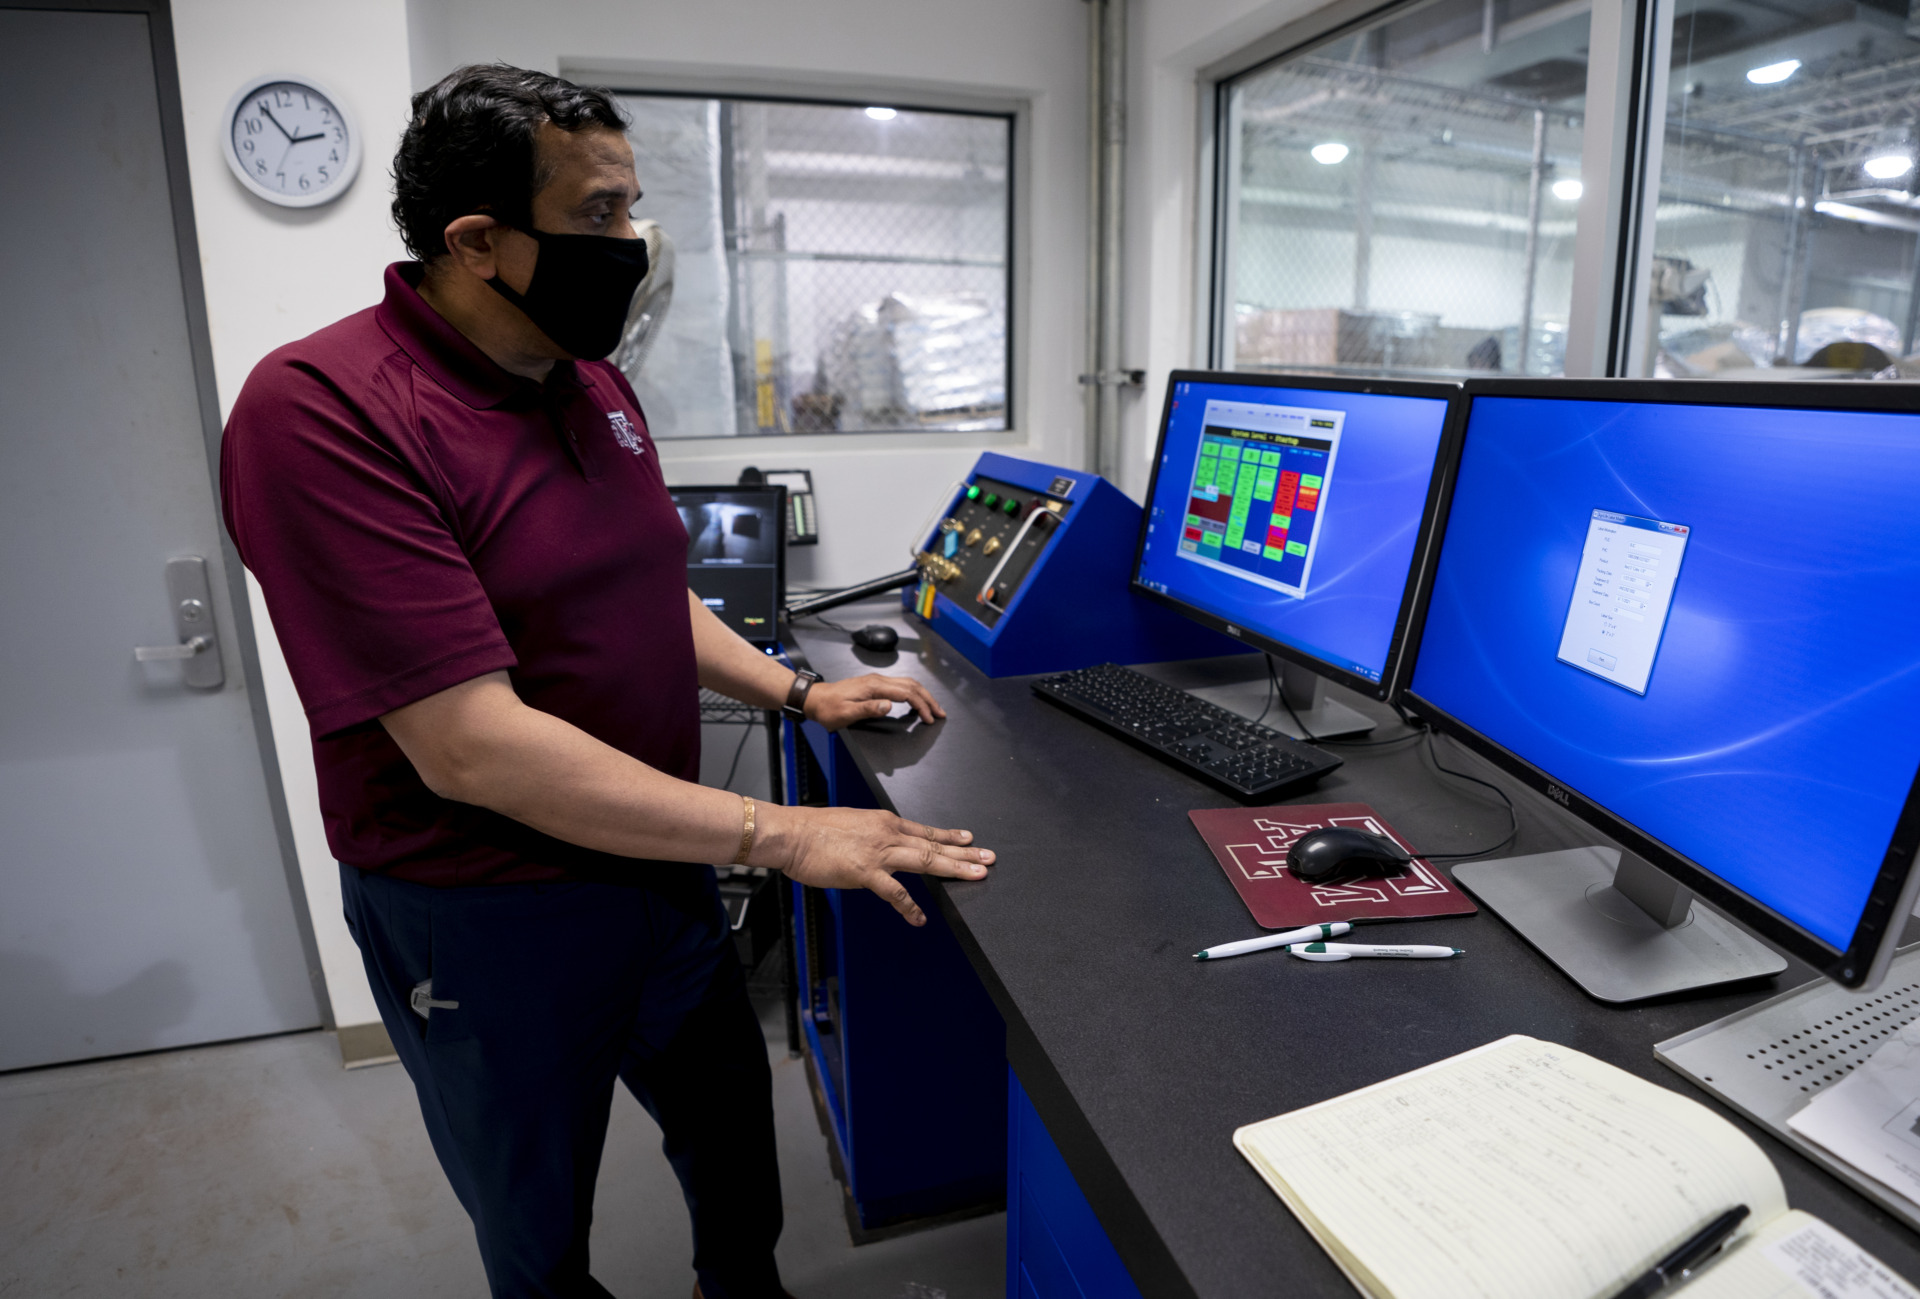 Texas A&M eBeam center helps reduce risk of radiological terrorism